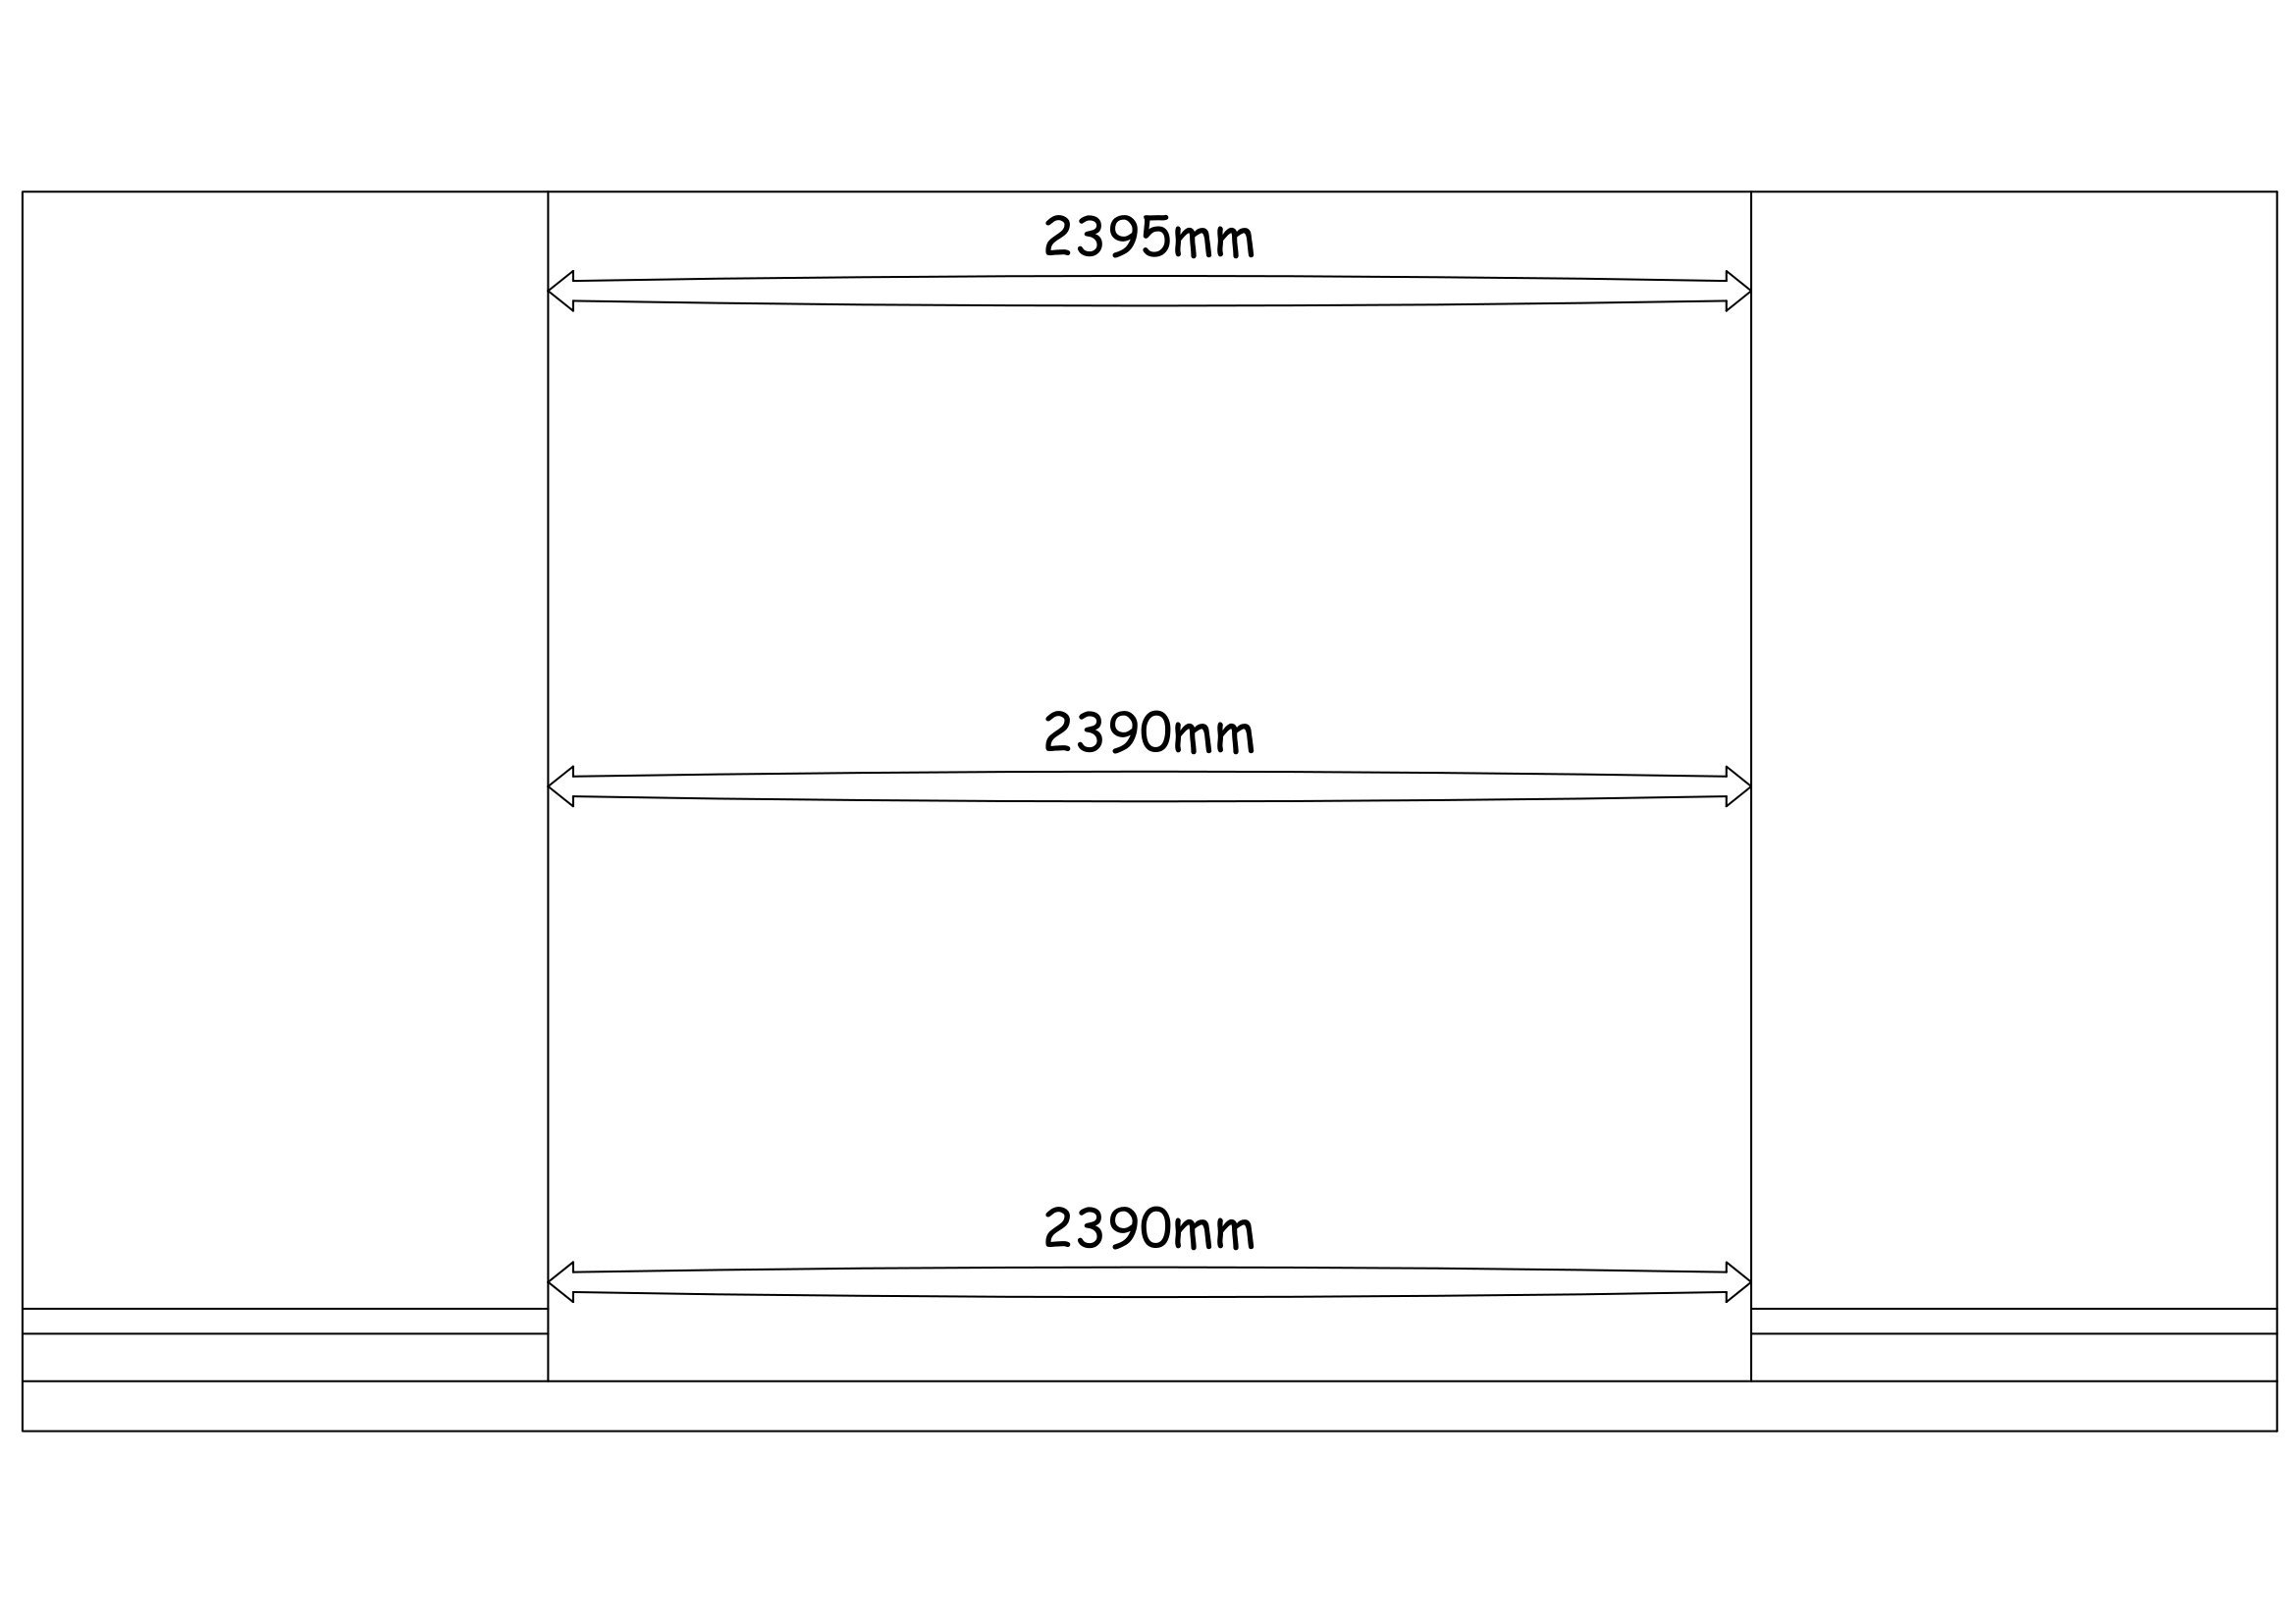 14 - How to Measure for a Wardrobe Opening for New Sliding Door Wardrobe #2.jpg